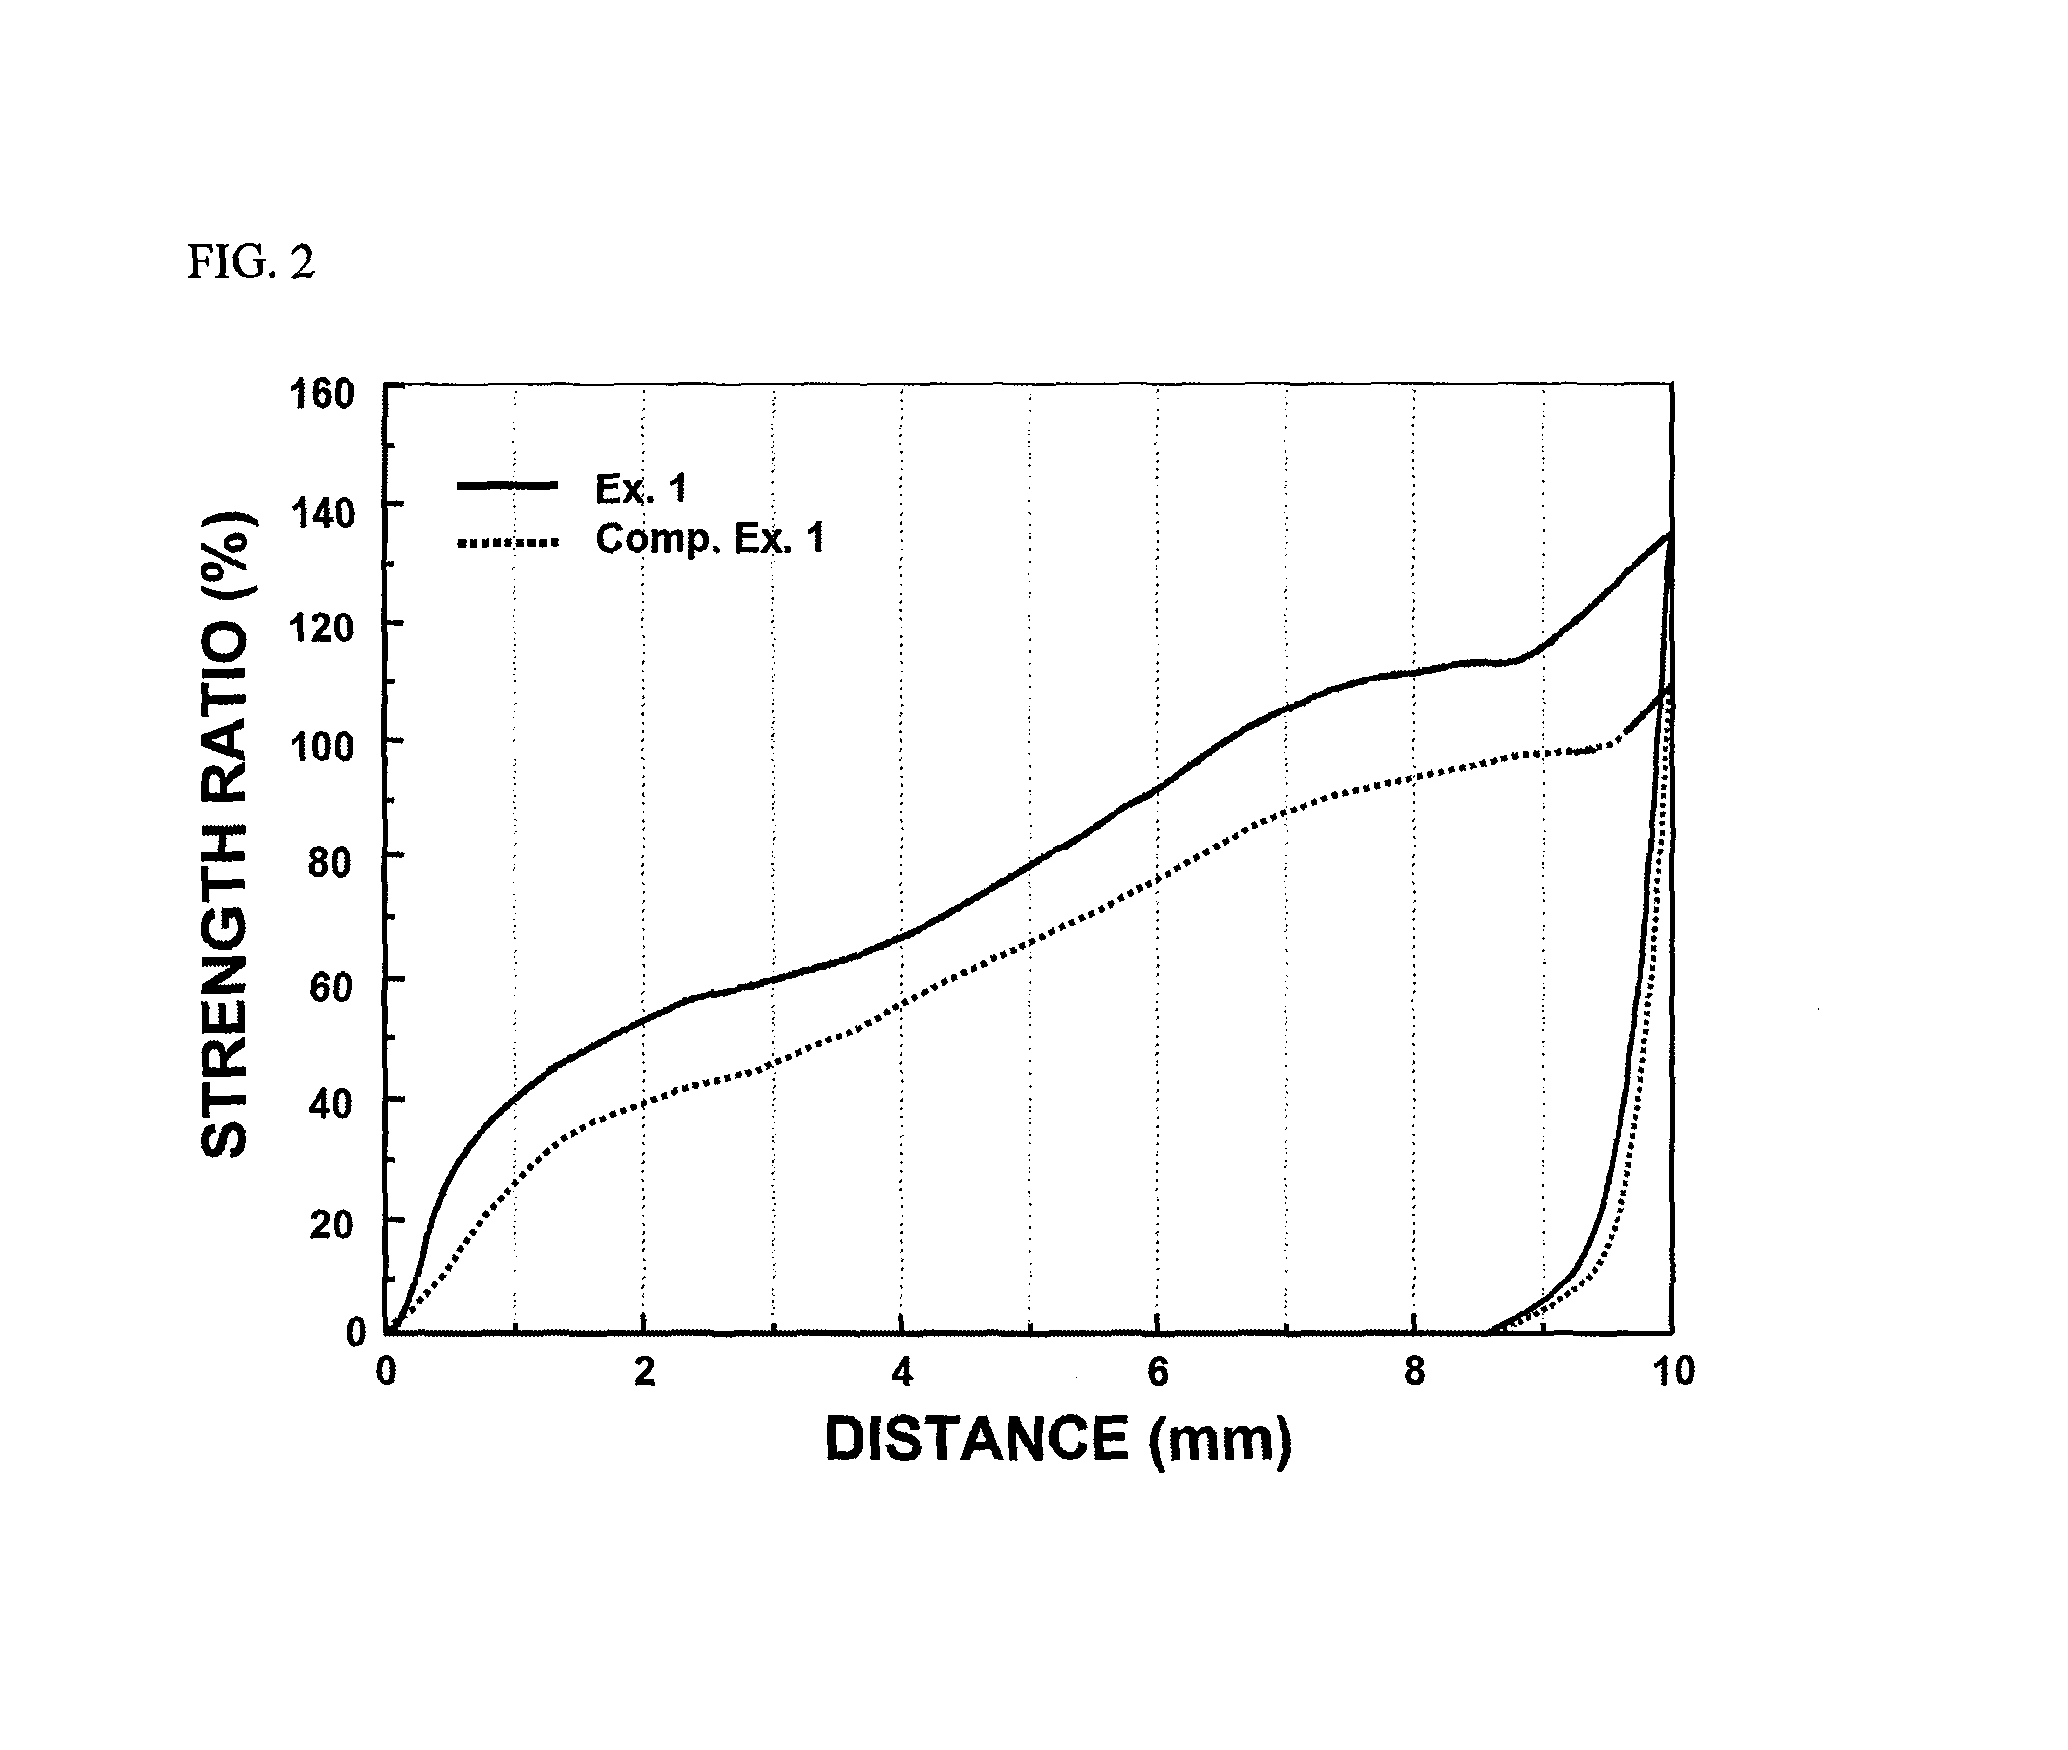 Preparation process for preventing deformation of jelly-roll type electrode assembly